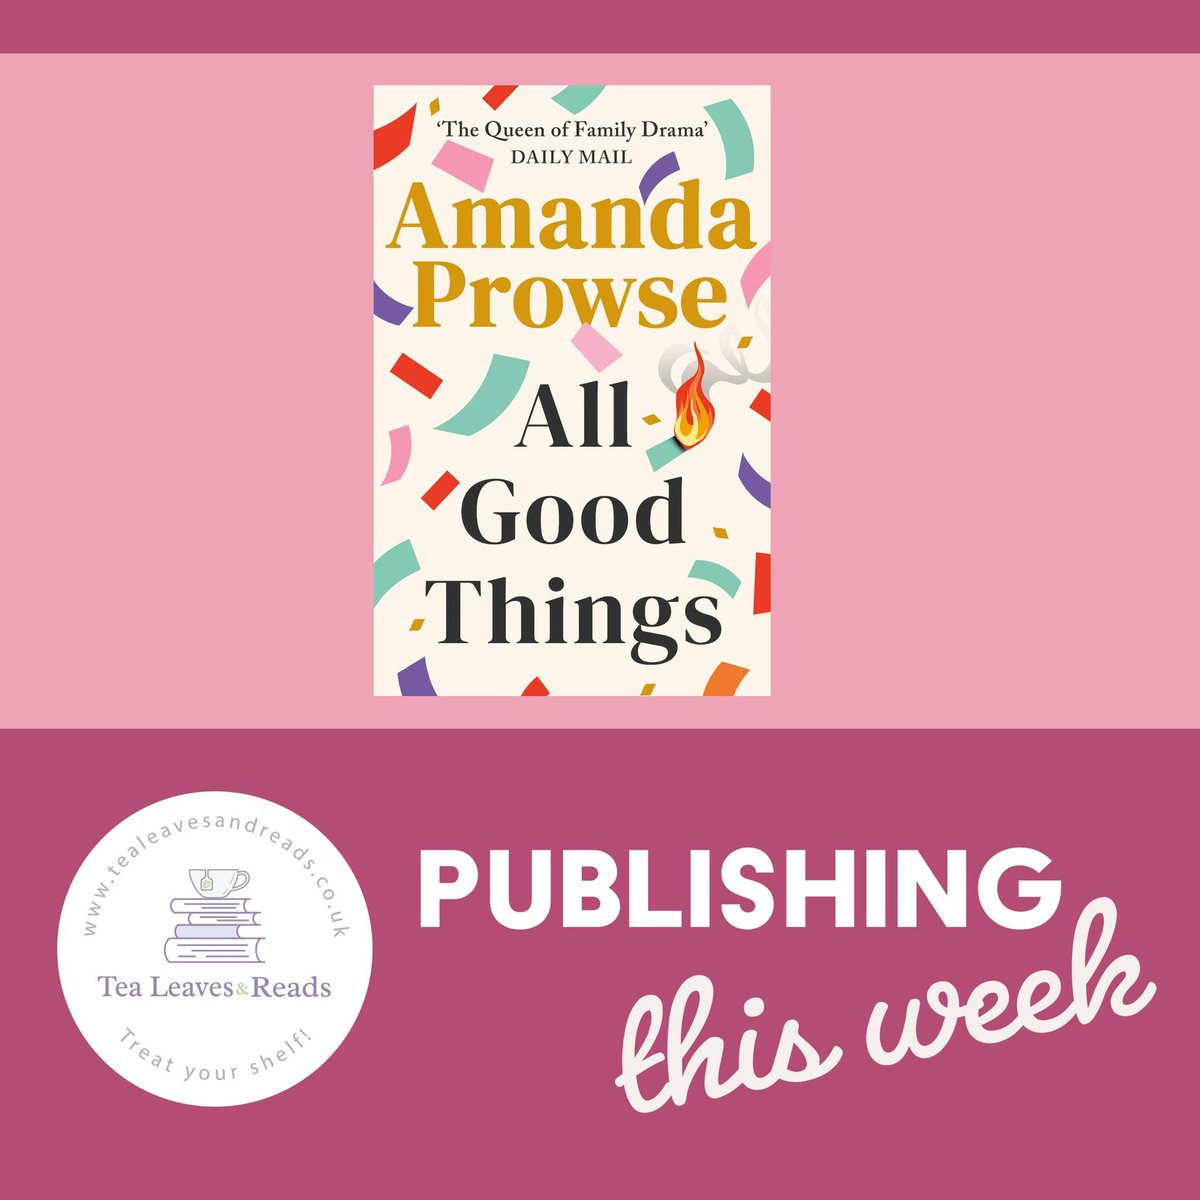 Amanda Prowse's books hold a special place in my heart. Not only is she a beautifully wonderful person, and one of the very first Authors to support our business! So we are delighted to have #AllGoodThings by @MrsAmandaProwse in stock on publication day! tealeavesandreads.co.uk/product/all-go…